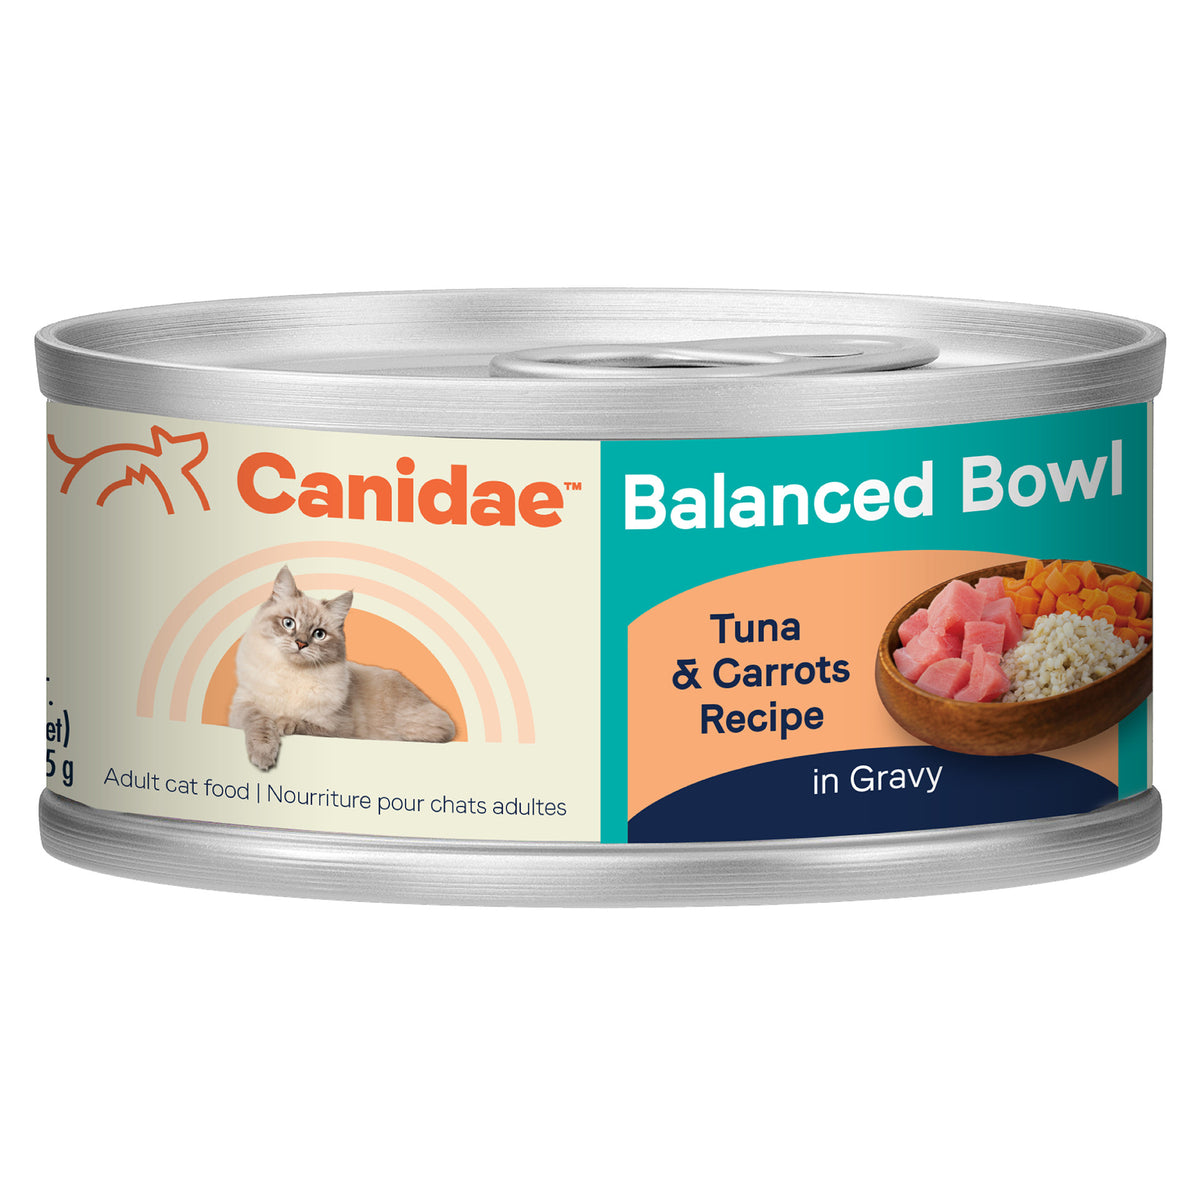 Canidae - Balanced Bowl Tuna & Carrots in Gravy Recipe Canned Cat Food